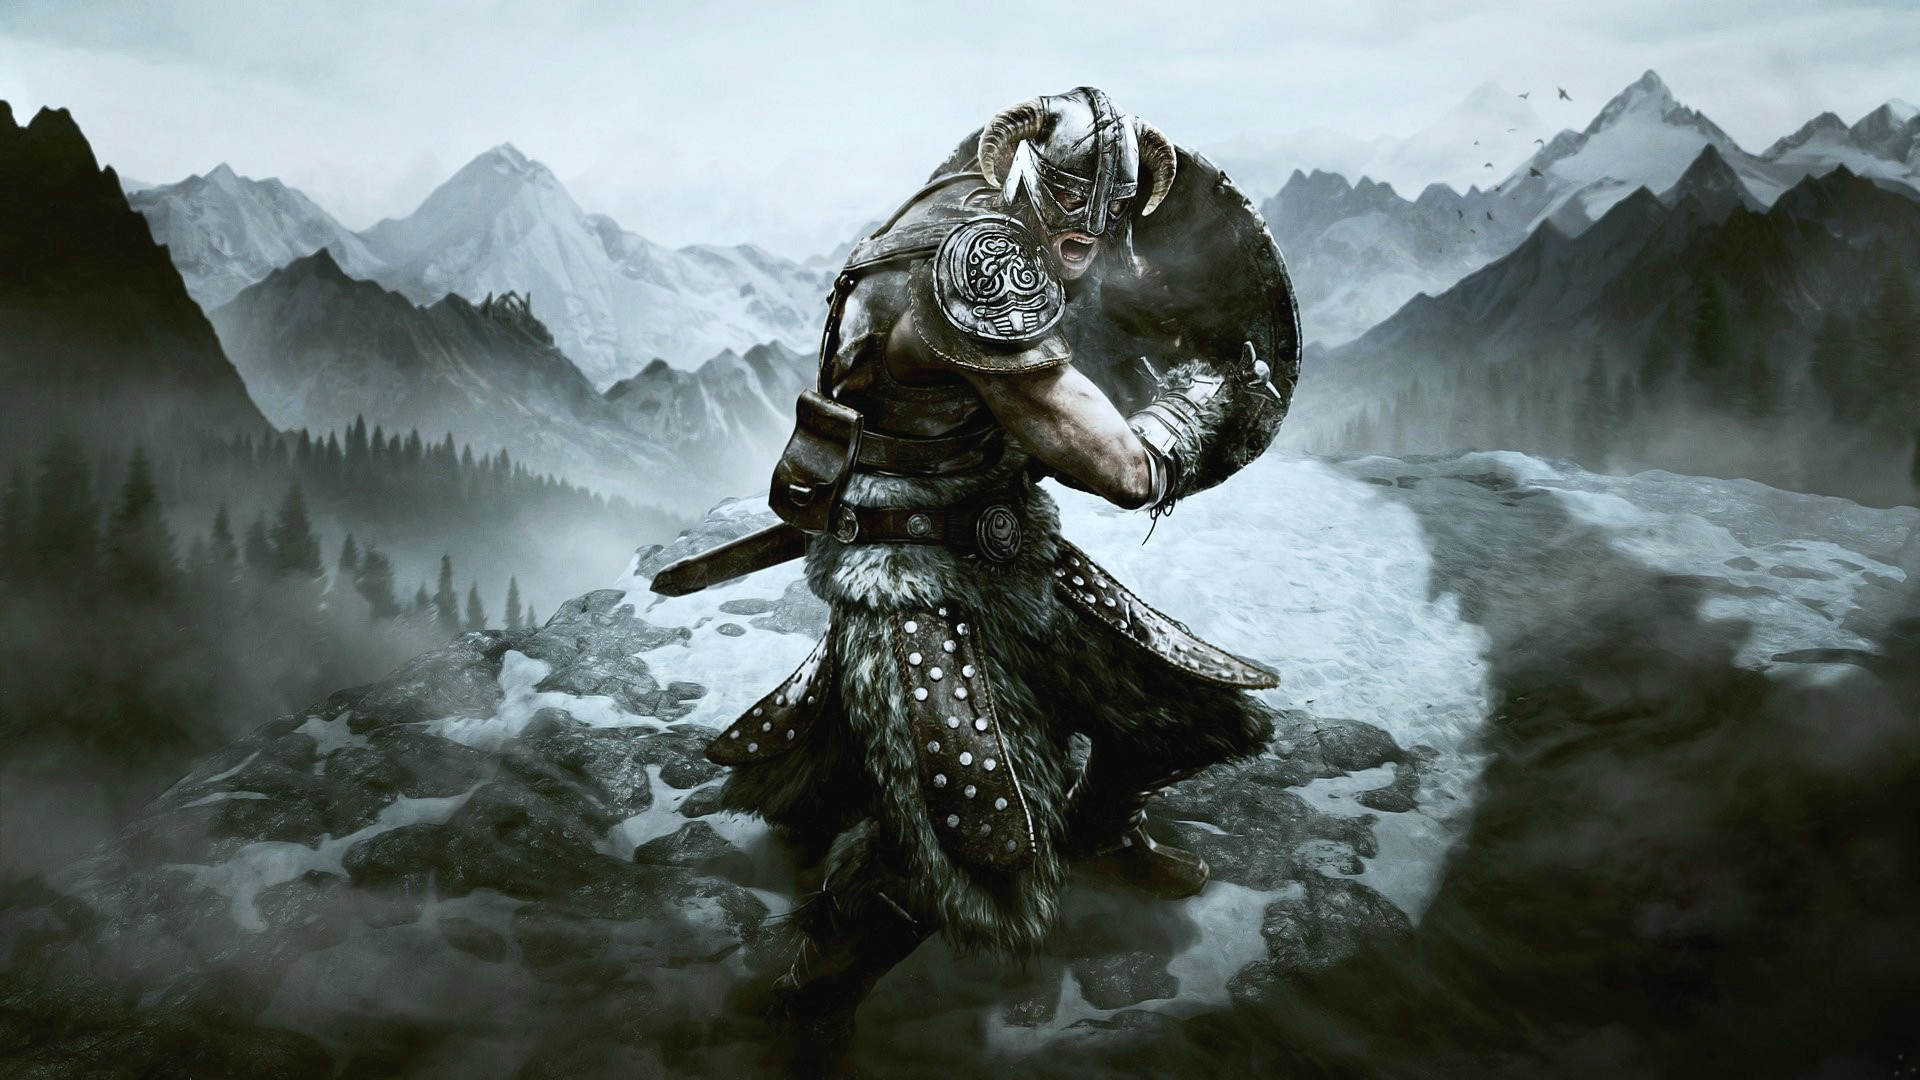 Skyrim warrior in epic armor - a video game image perfect for desktop wallpaper!